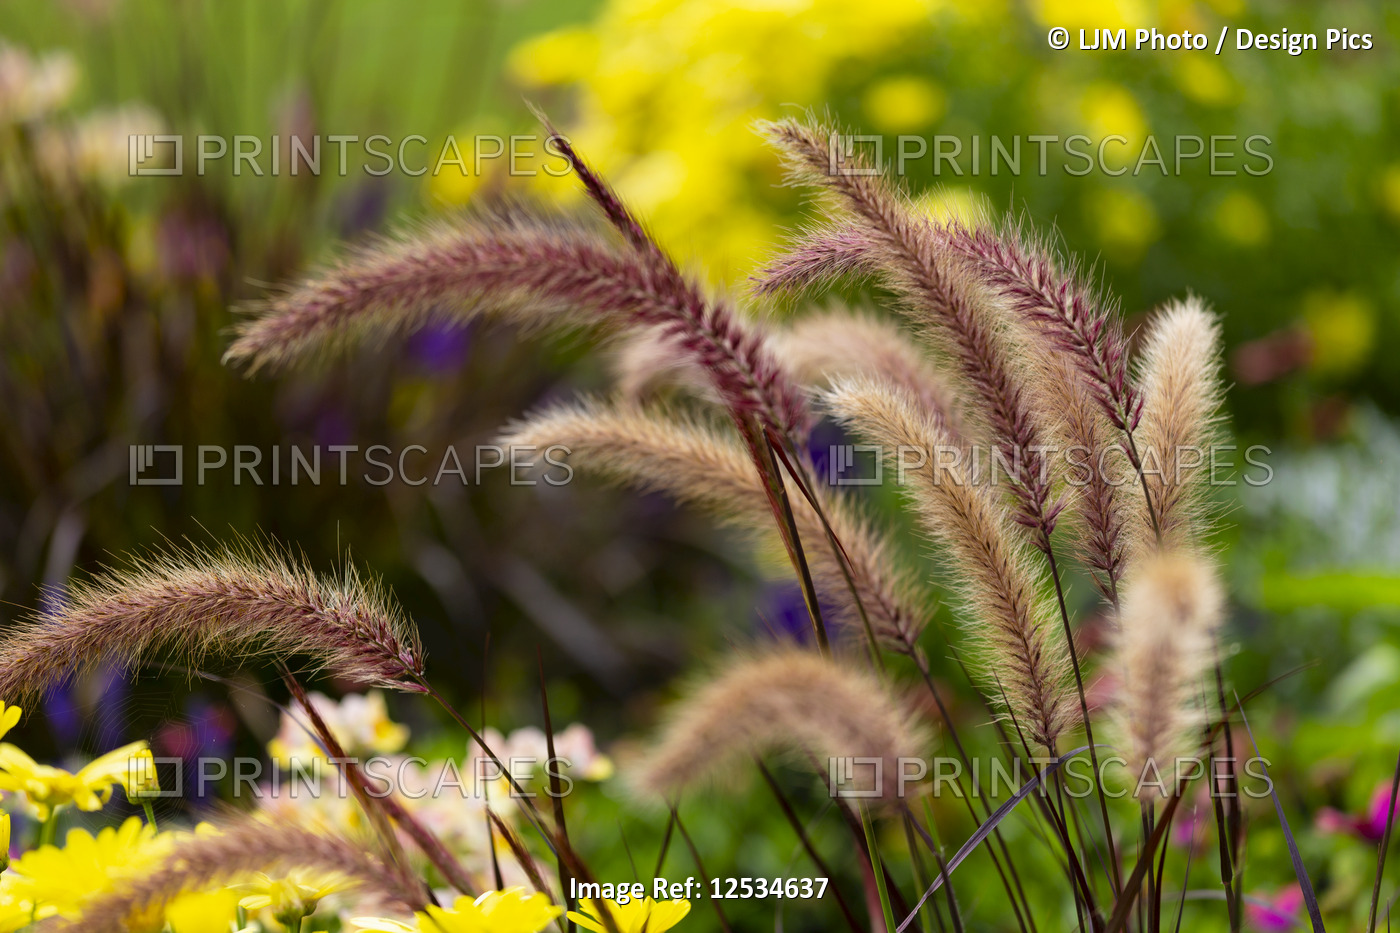 A beautiful array of colourful foxtail grass against a green grass and yellow ...